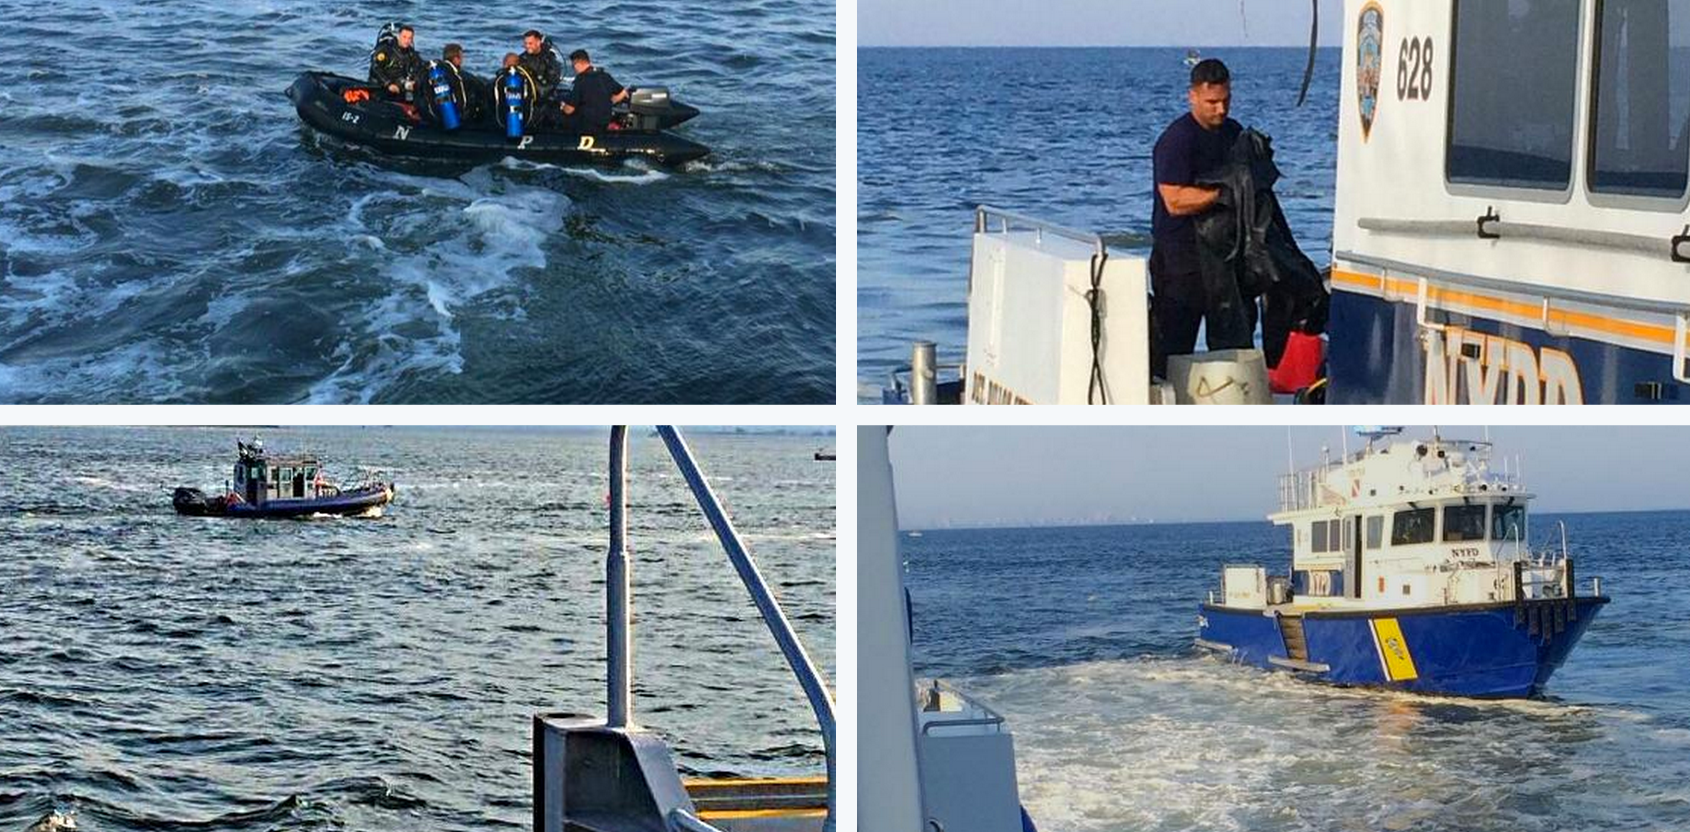  Search teams on the scene of the reported sunken vessel in the Sandy Hook Channel late this afternoon. (Image: NYPD) 